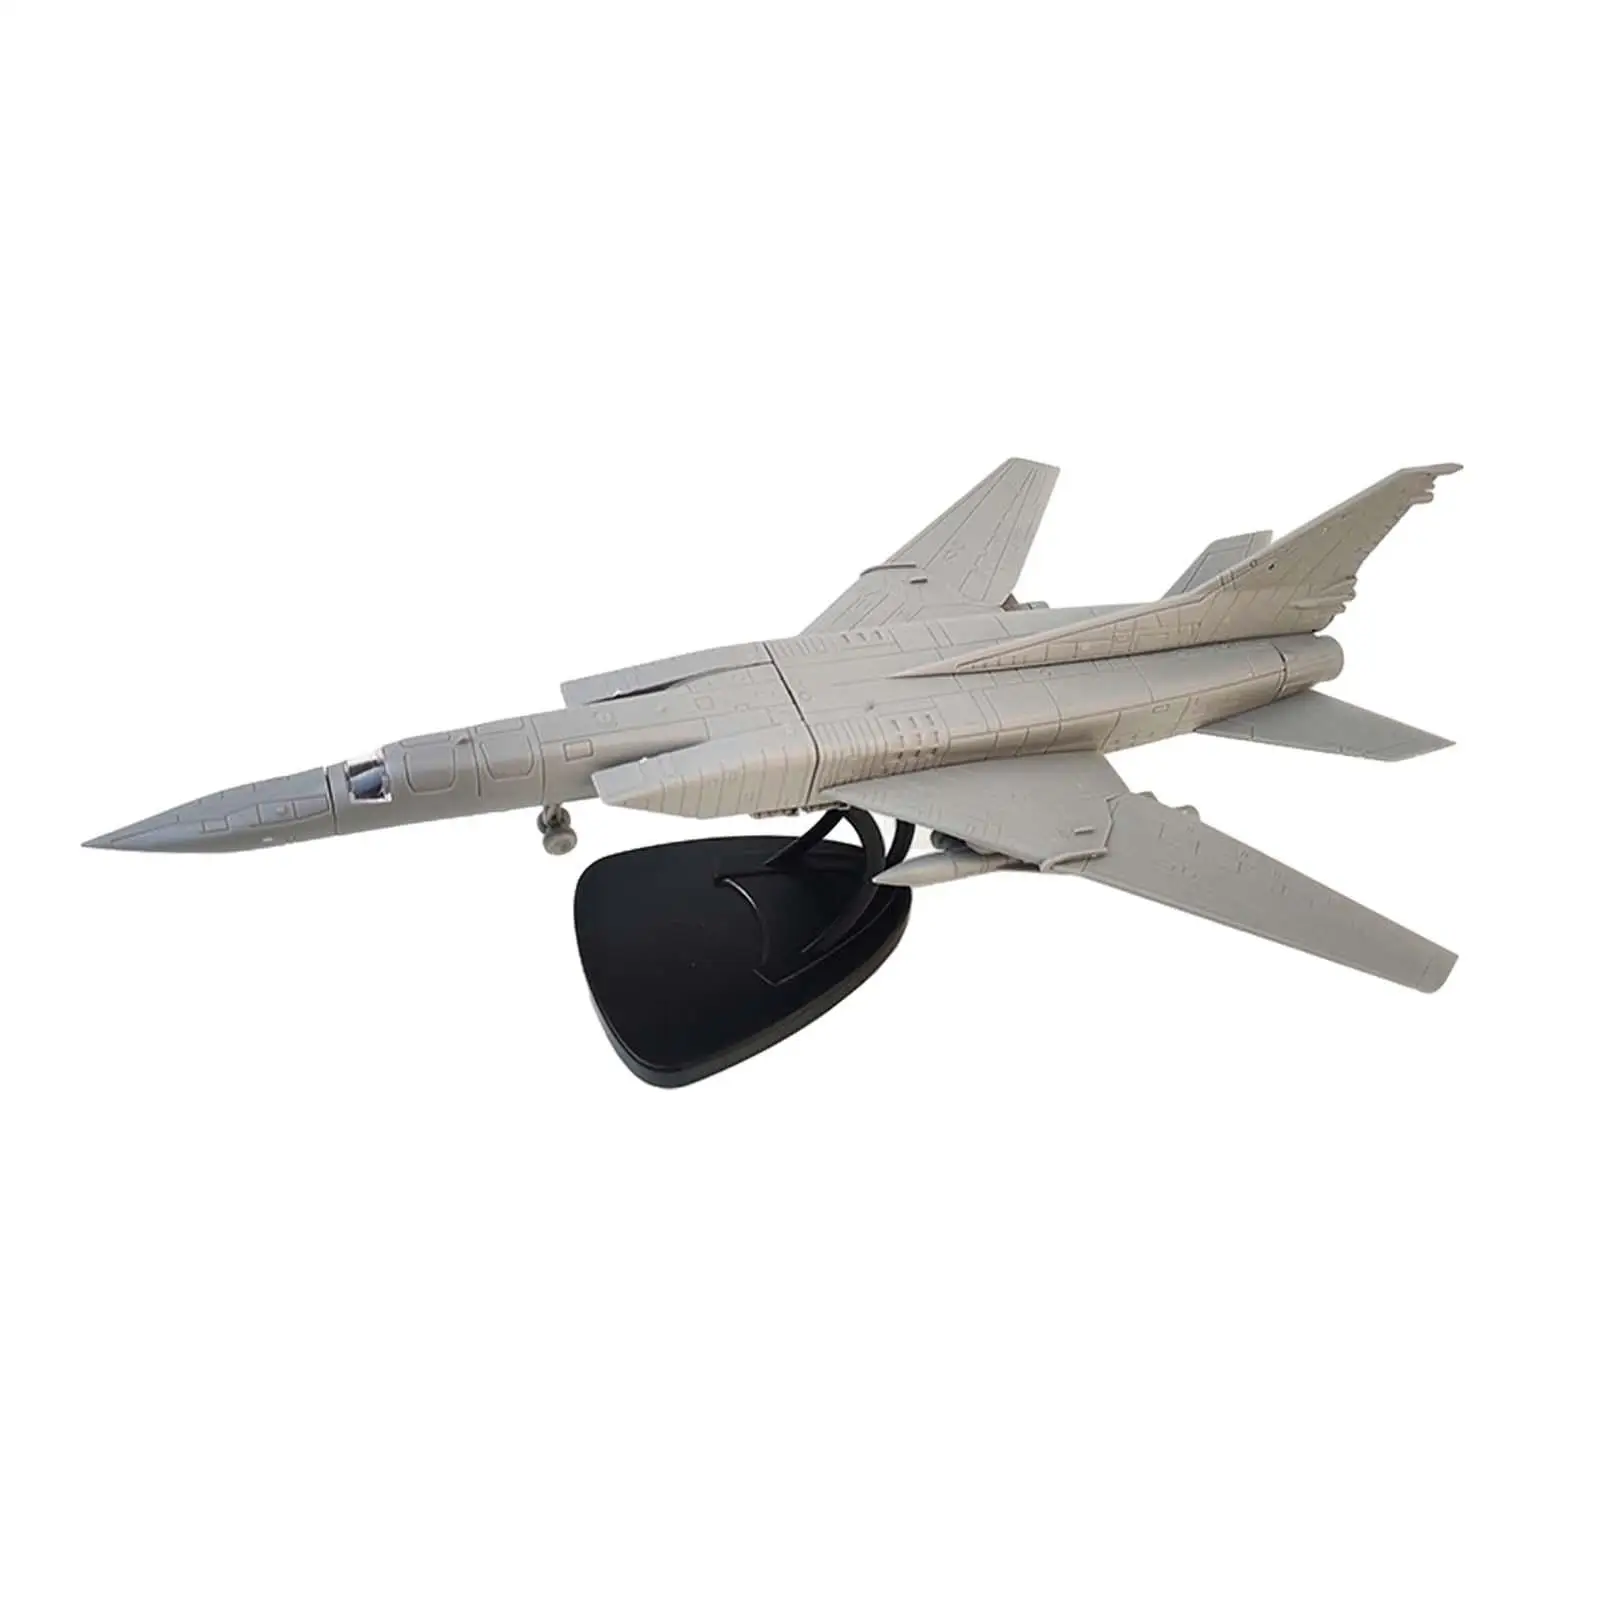 

Simulation Miniature Toys with Base Party Favor 1:144 Bomber Airplane Model for Living Room Study Bookshelf Bedroom Enthusiast